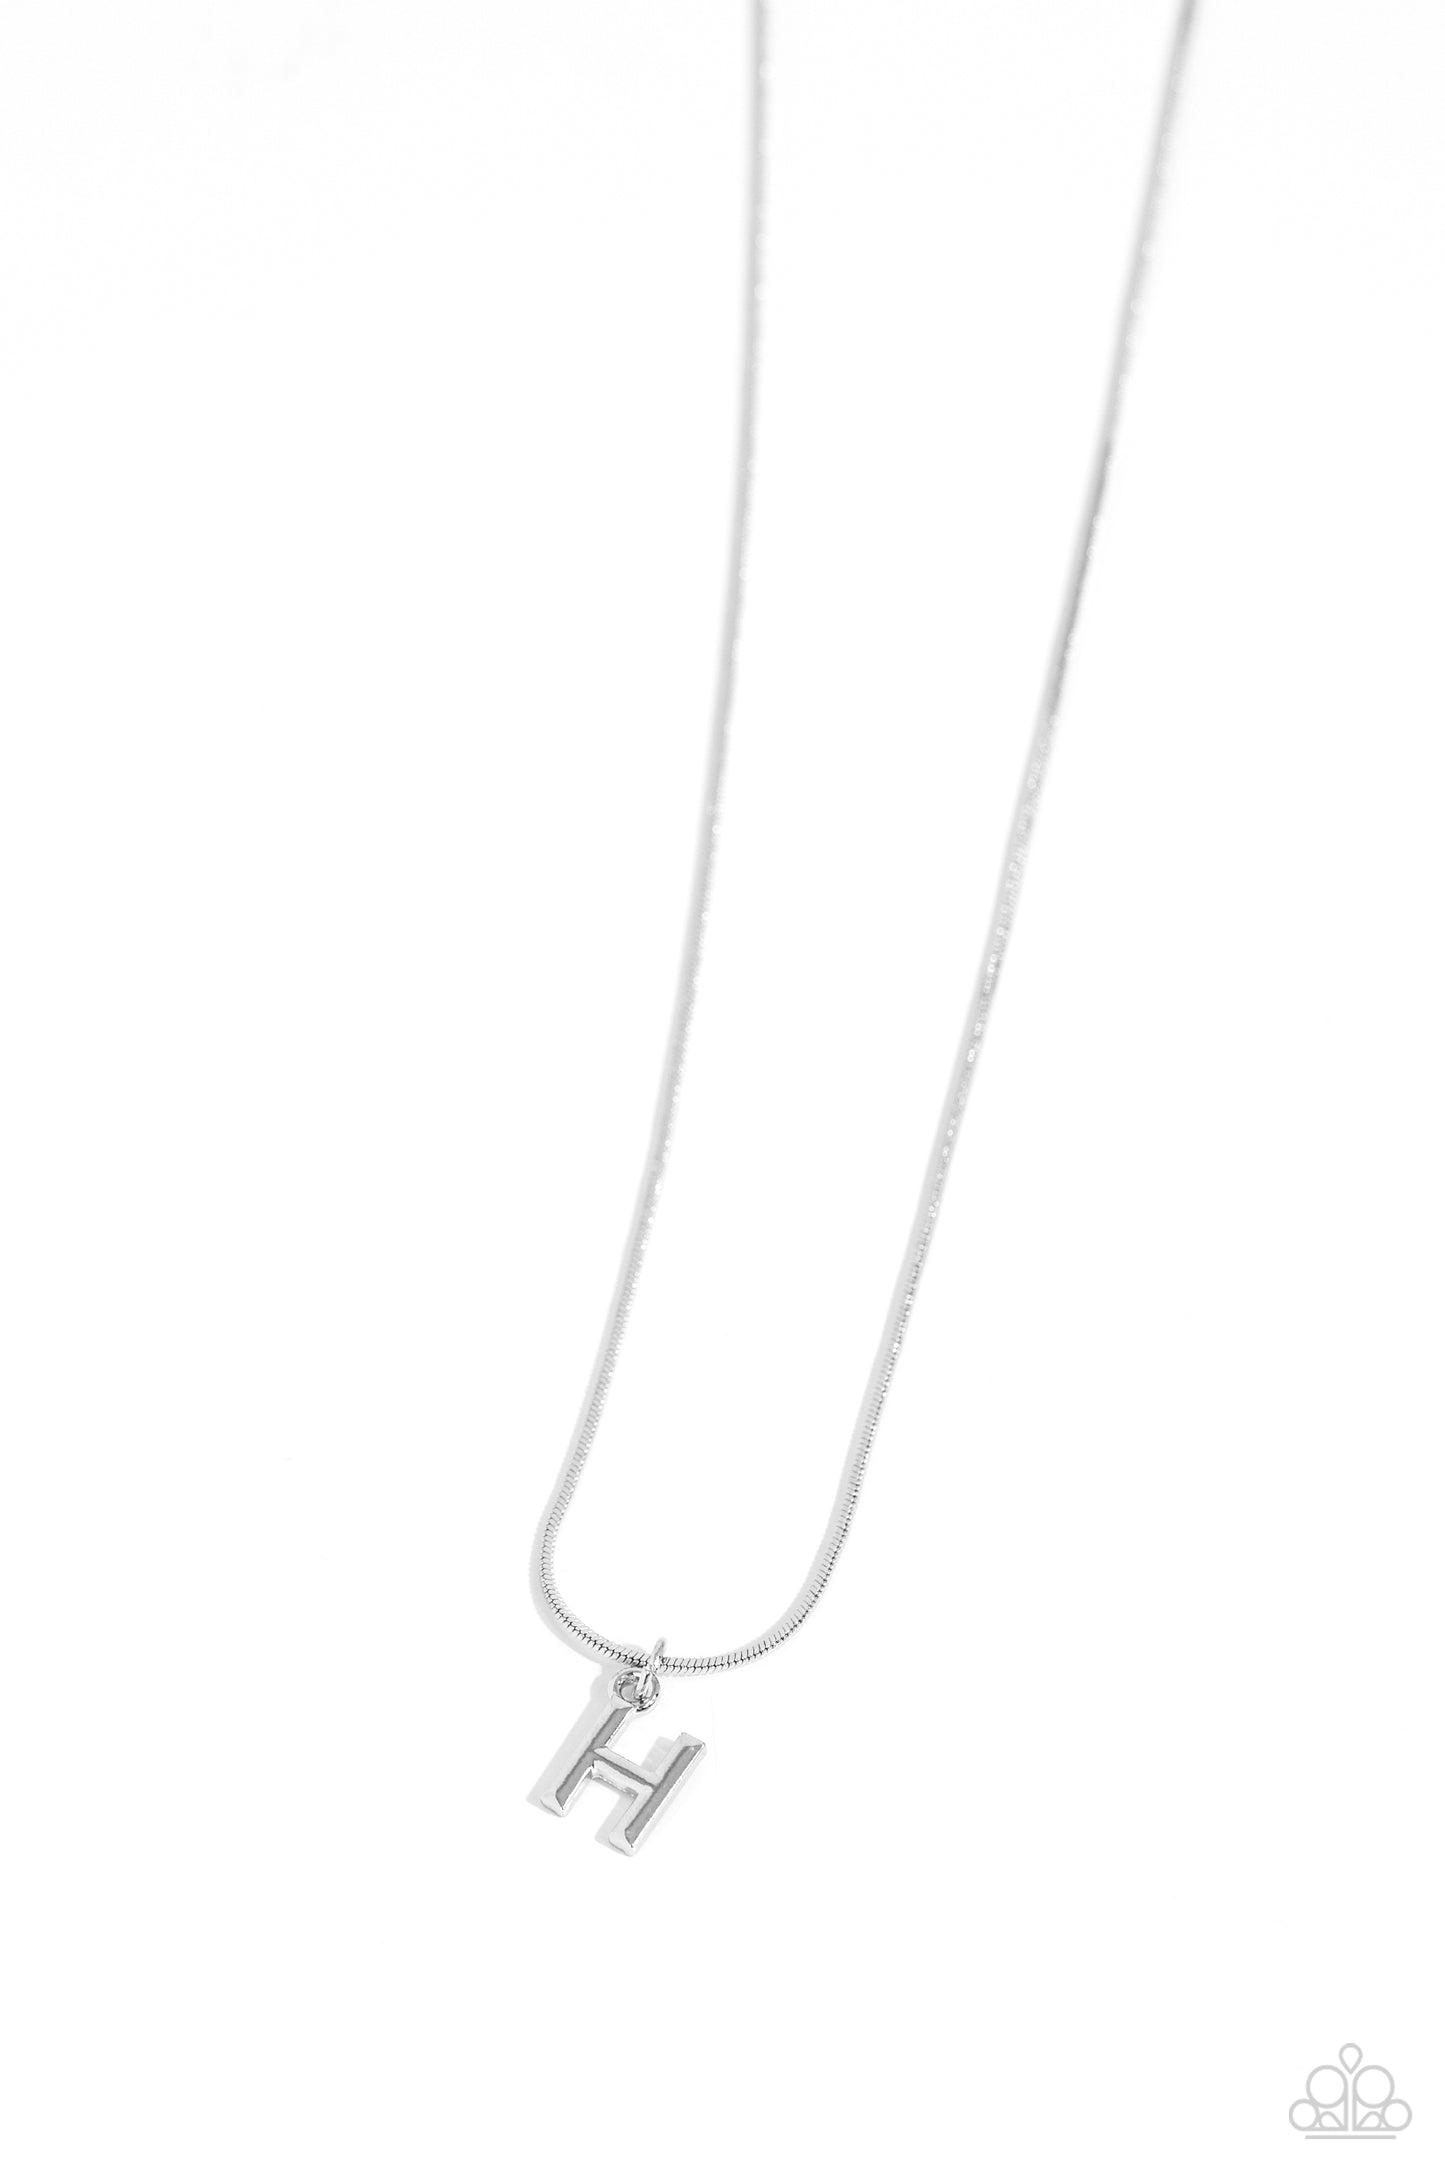 Seize the Initial - silver - H - Paparazzi necklace